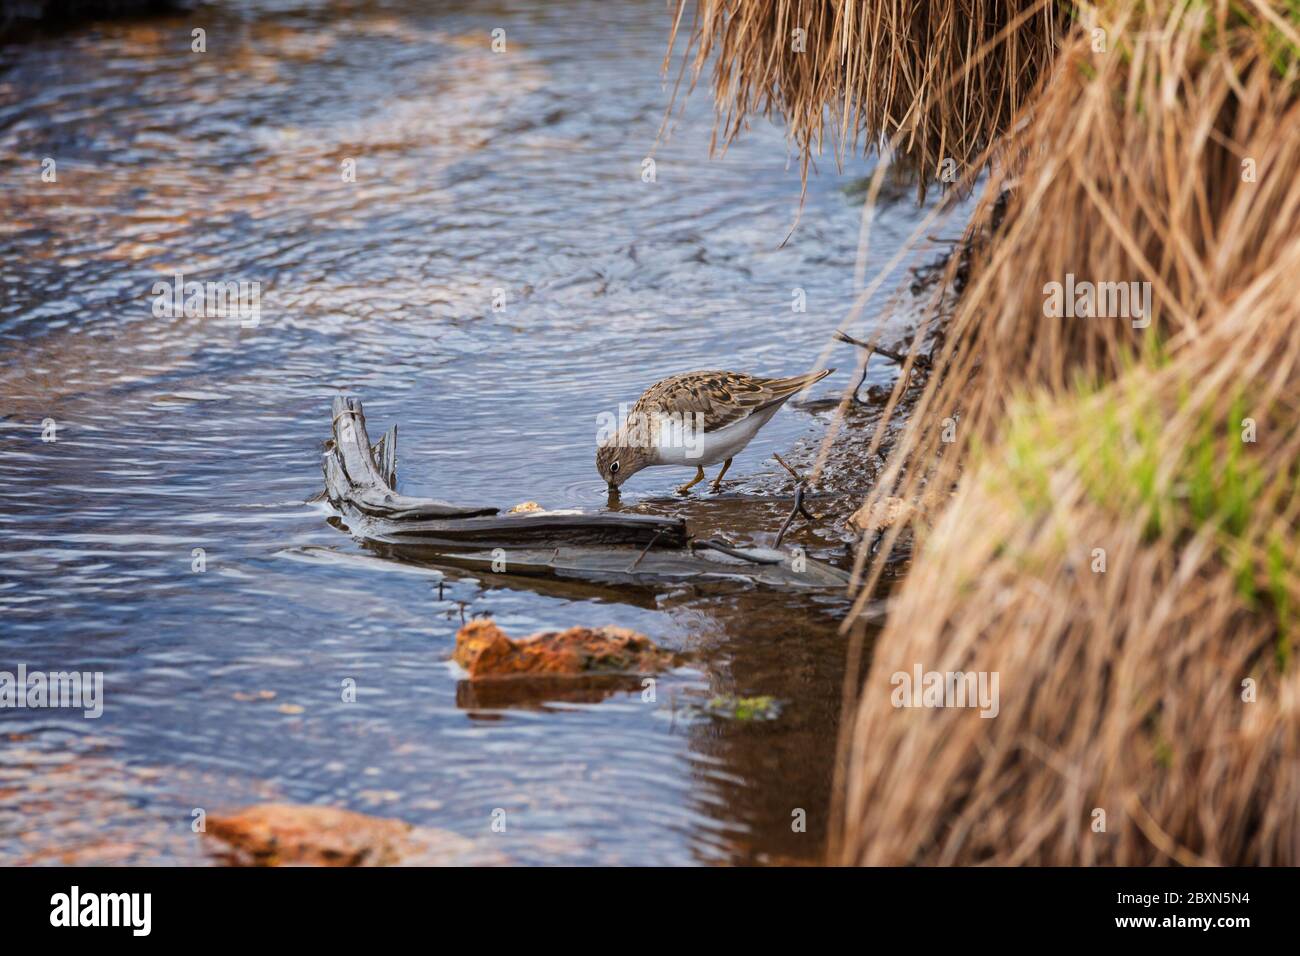 A small sandpiper searches for food on a bog among tussocks of grass Stock Photo